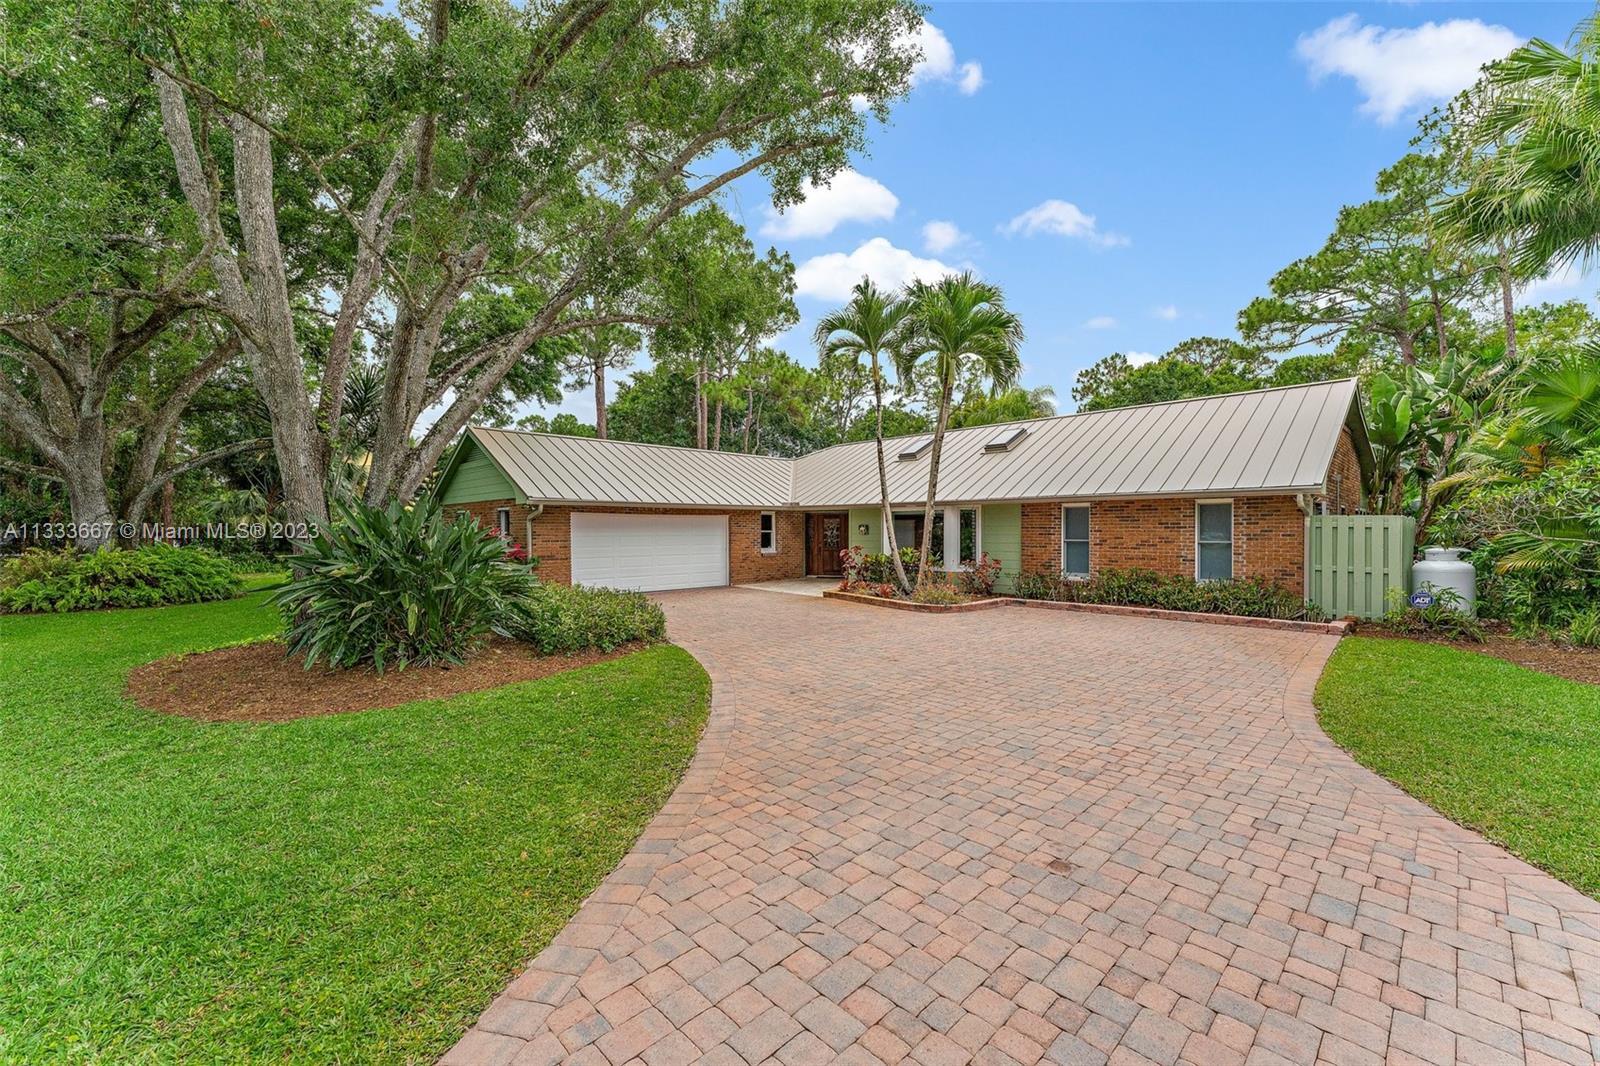 Private and quiet, this 3 bedroom, 2.5 bathroom pool home with a guest cottage in the Trailwood comm